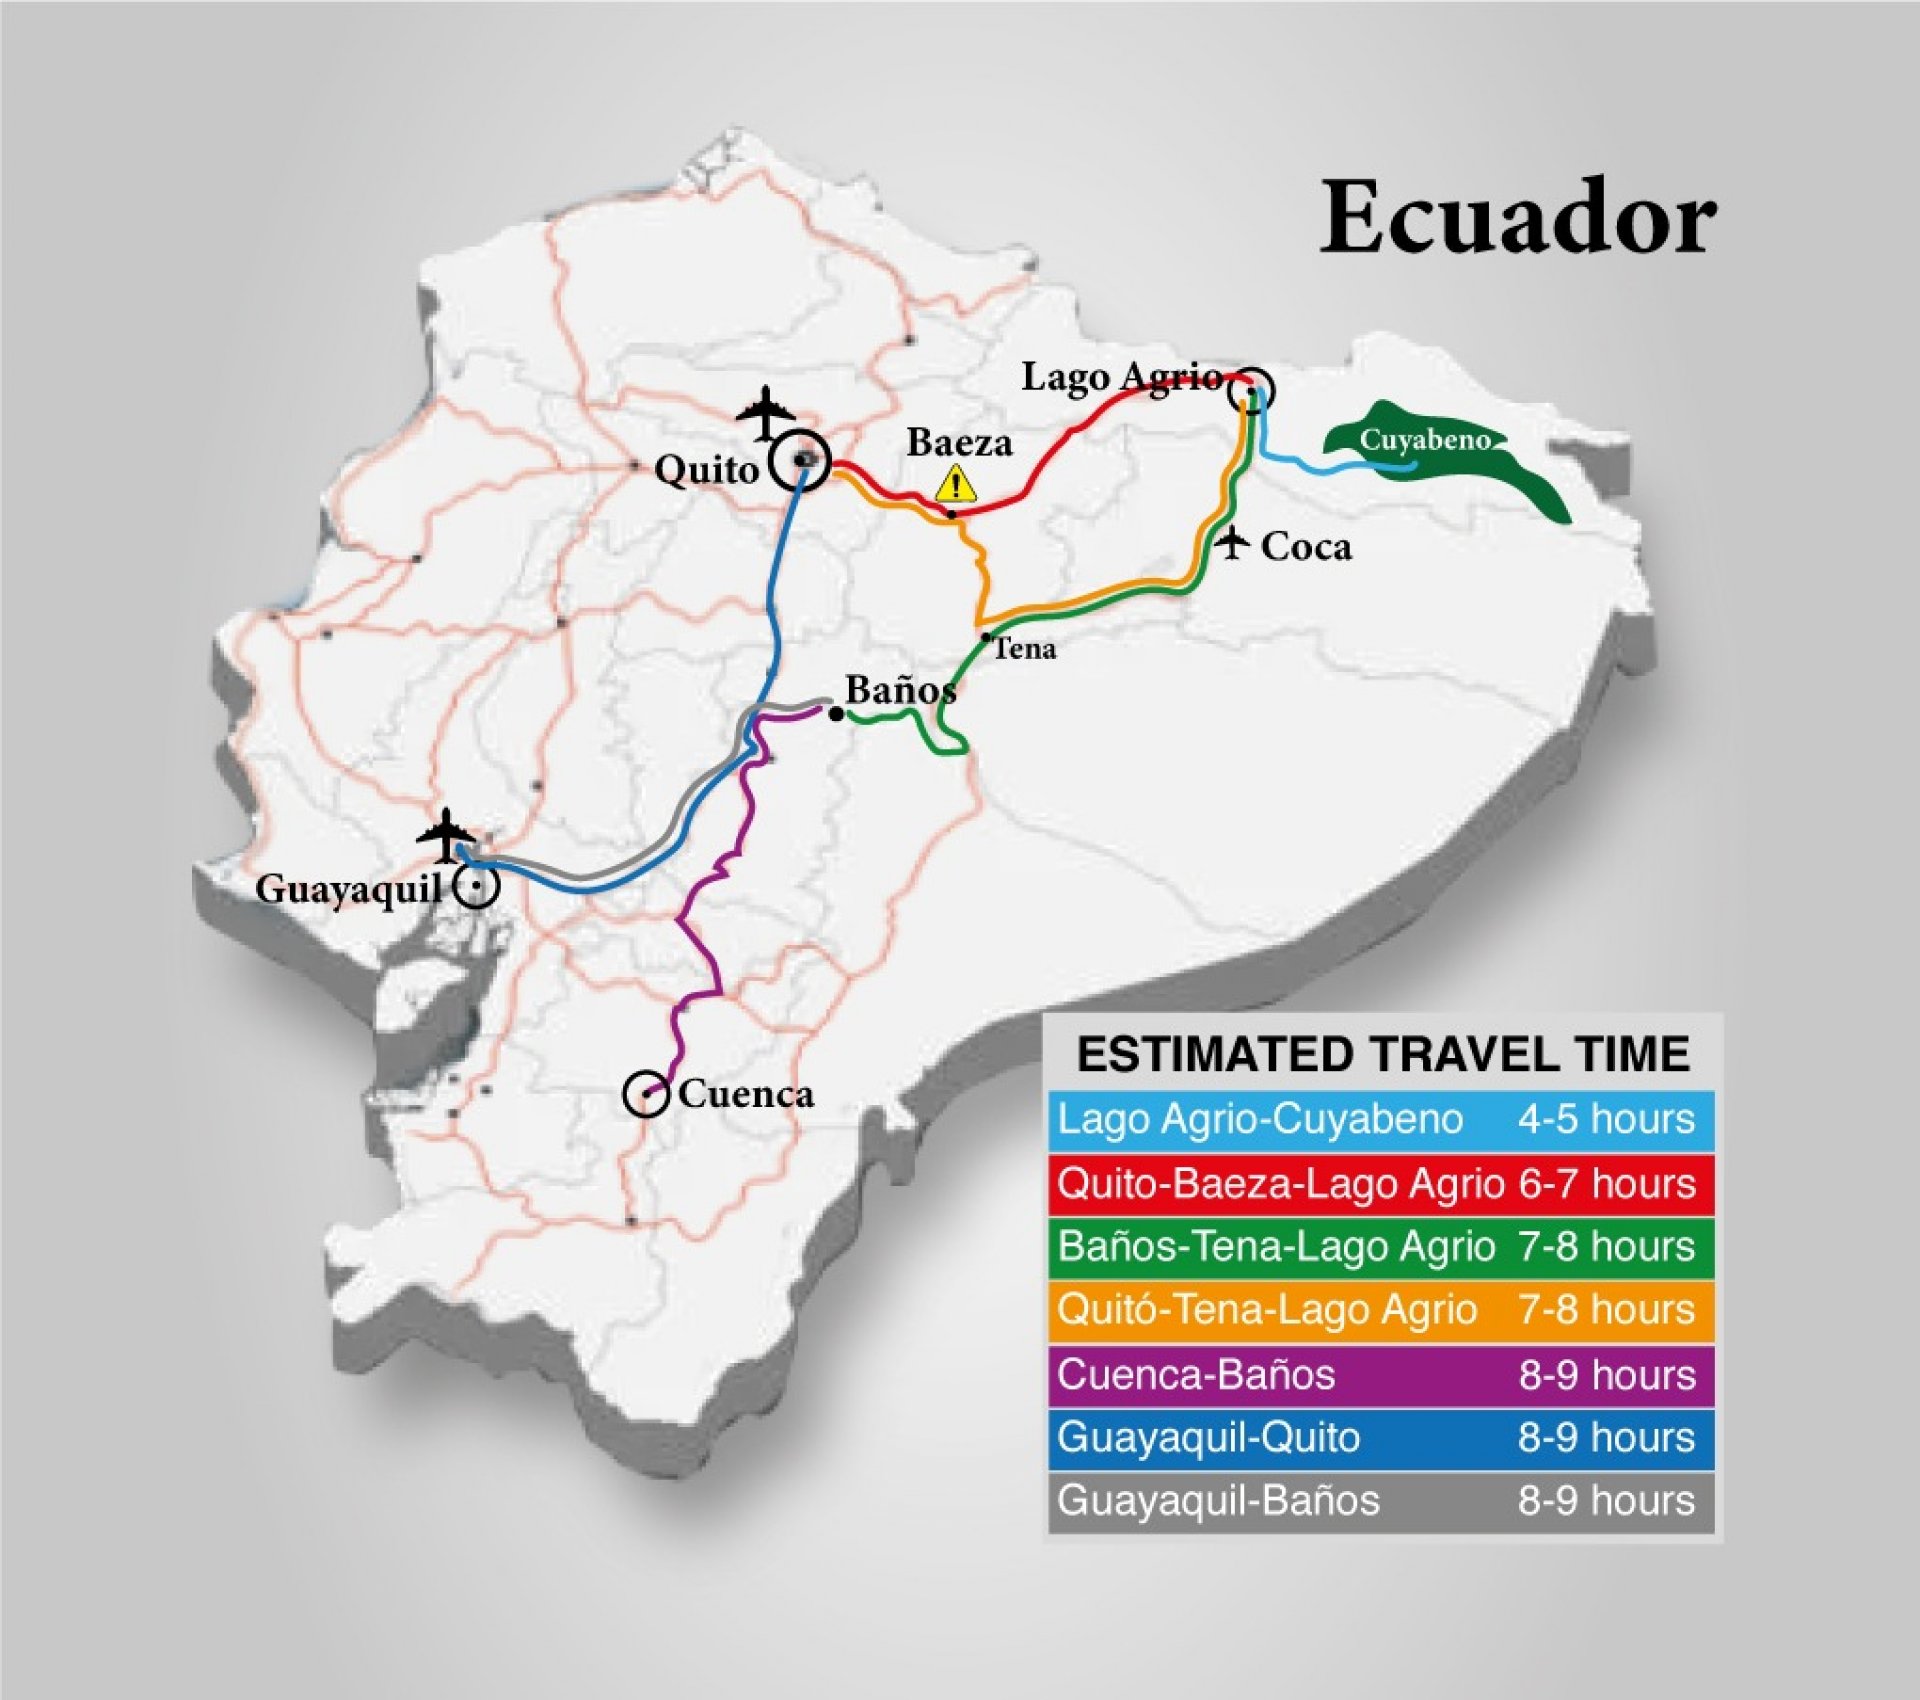 Travel by car to Cuyabeno (Lago Agrio) from Guayaquil?